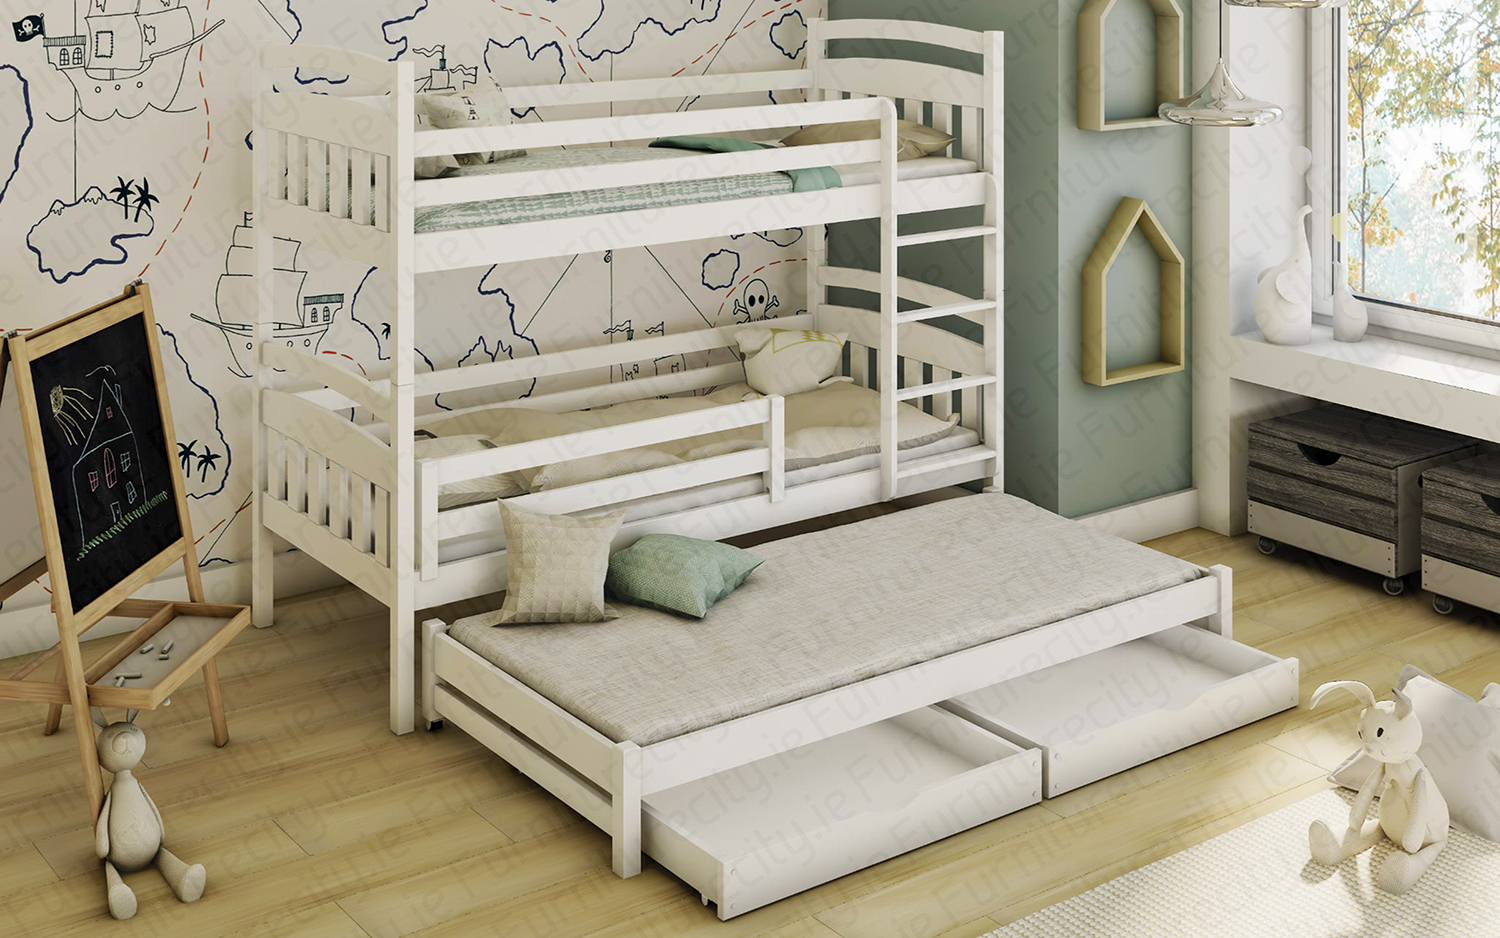 Bunk Bed Specialists Top Quality And, Quality Bunk Beds With Storage